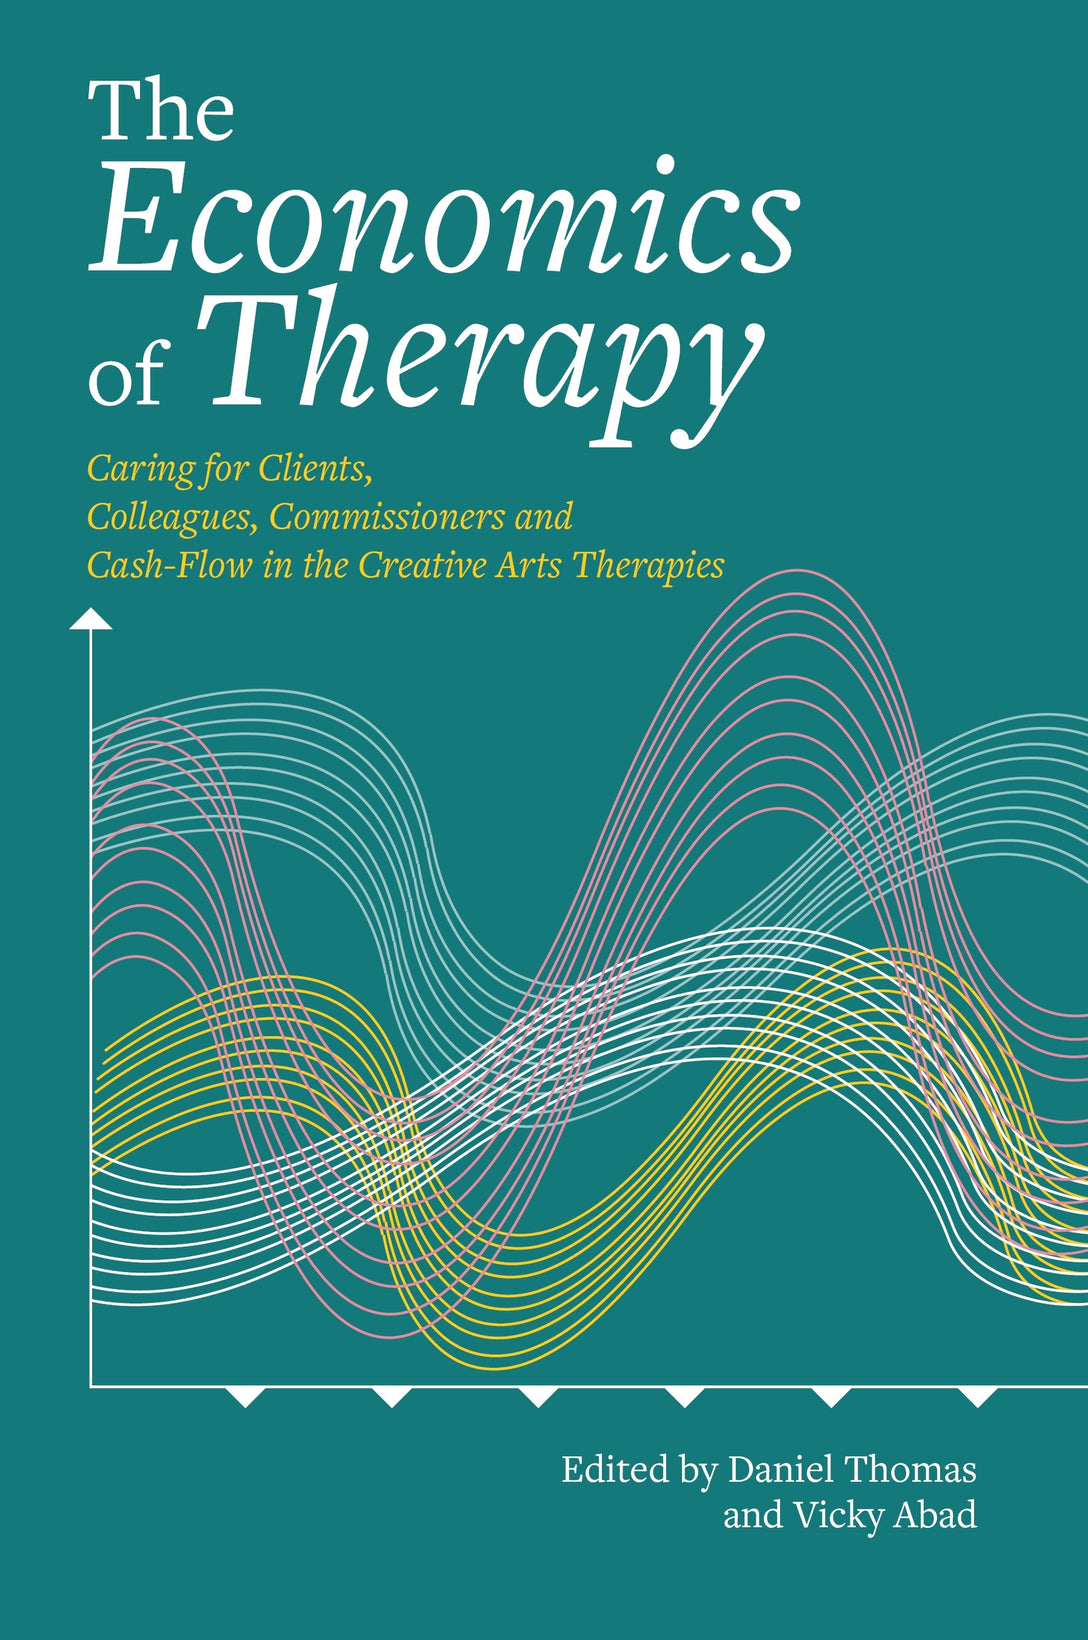 The Economics of Therapy by Brynjulf Stige, Daniel Thomas, Vicky Abad, No Author Listed